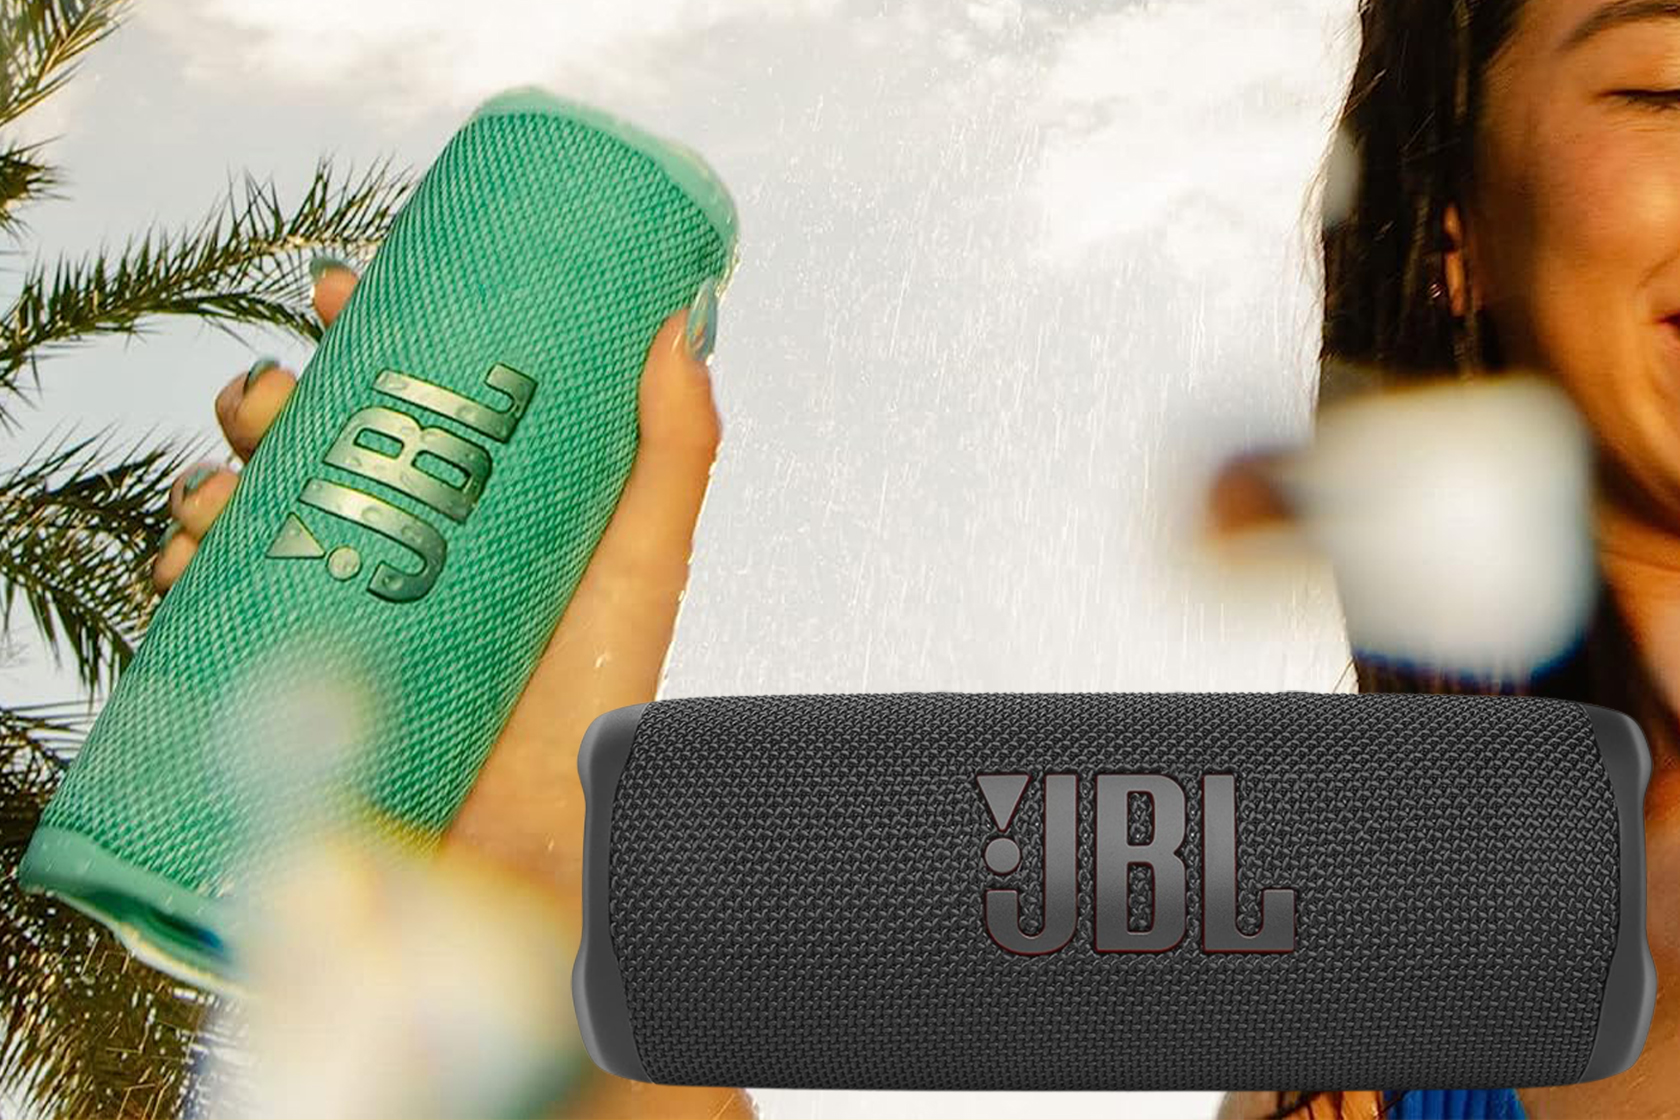 This JBL Flip 6 deal gives you a superb 23% off